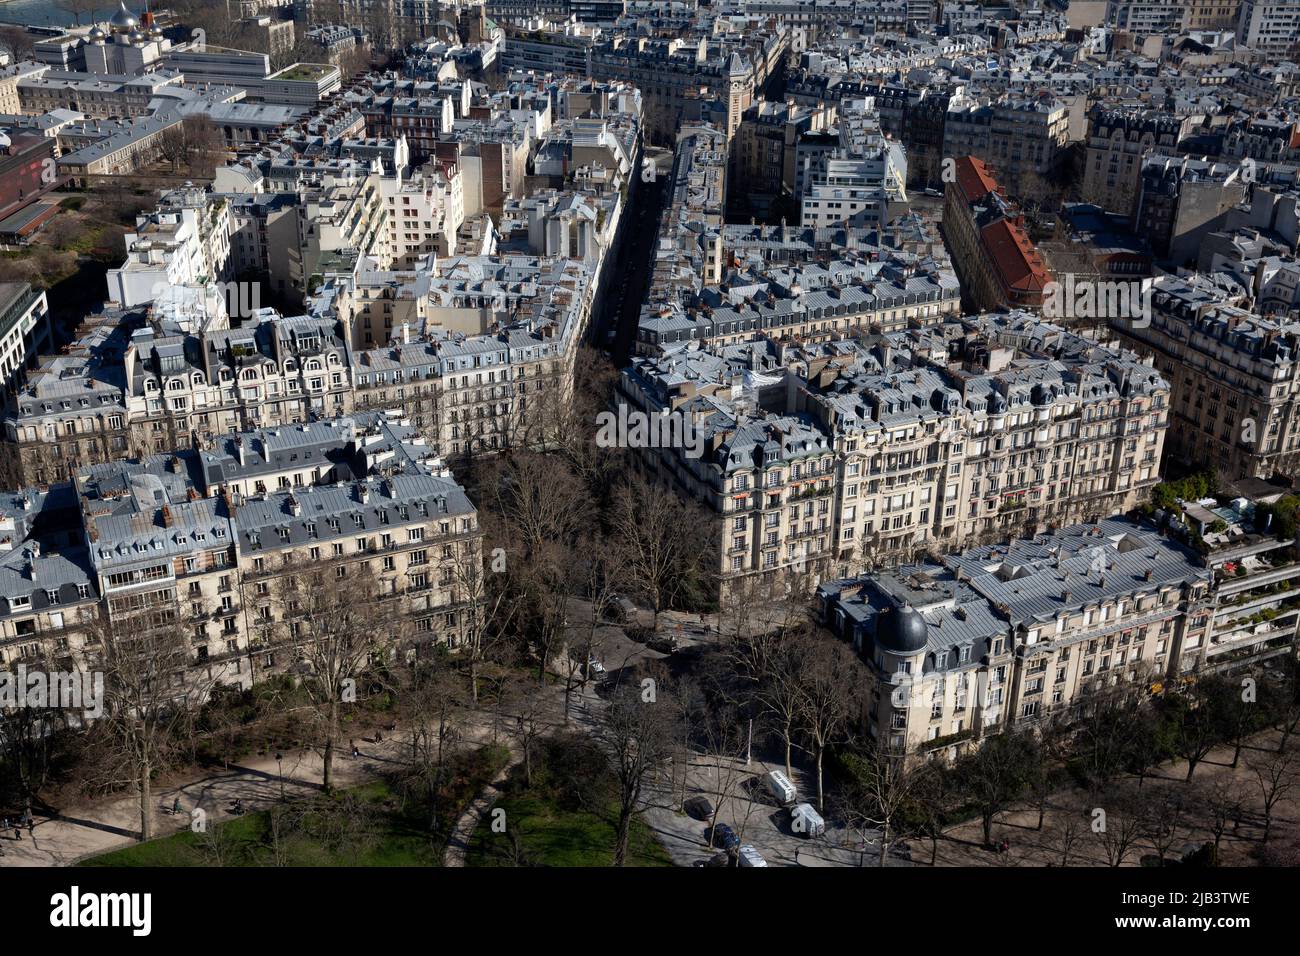 View of Paris from the Eiffel Tower in Paris, France on February 28, 2022. Paris is the capital and most populous city of France, with an estimated population of 2,165,423 residents in 2019 in an area of more than 105 km² (41 sq mi), making it the 34th most densely populated city in the world in 2020. Photograph by Bénédicte Desrus Stock Photo